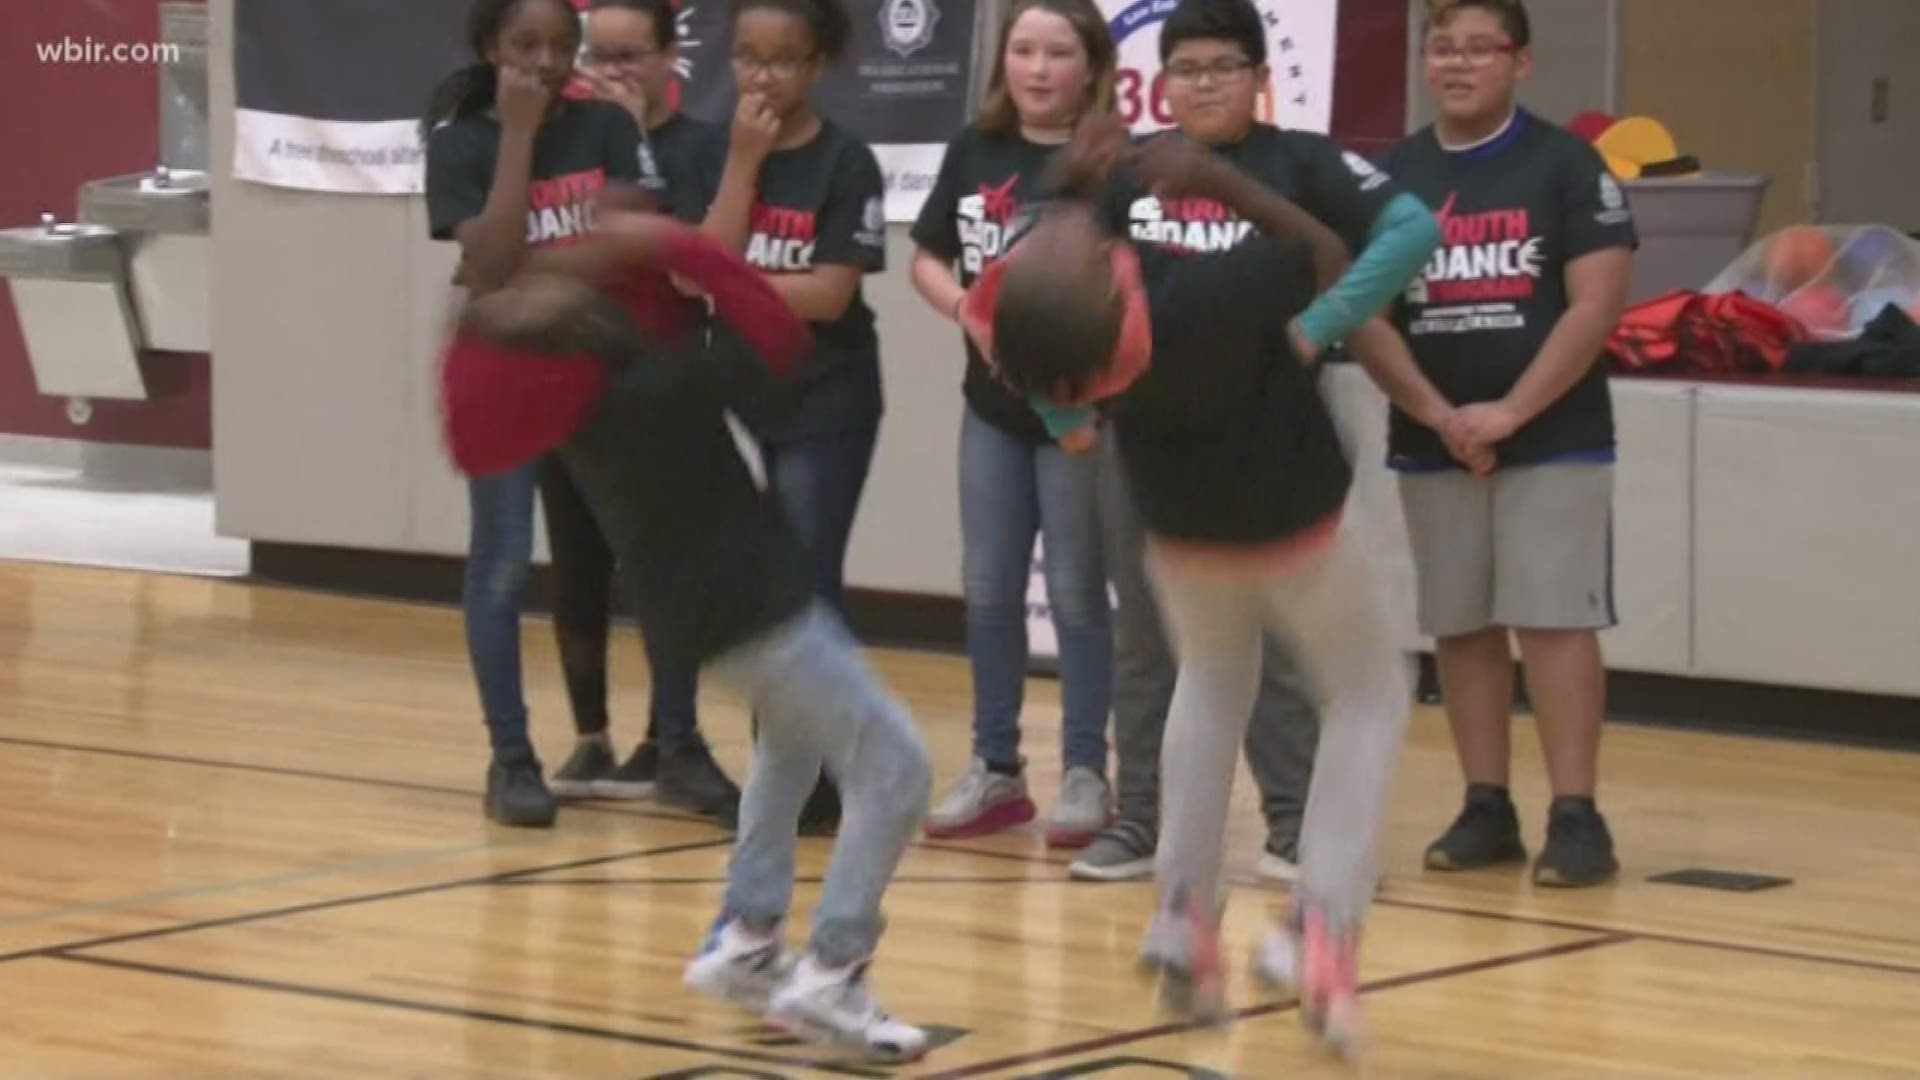 The DEA 360 Youth Program partnered with three Knox County elementary schools, teaching kids the dangers of illegal drugs, and using dance as a health alternative.